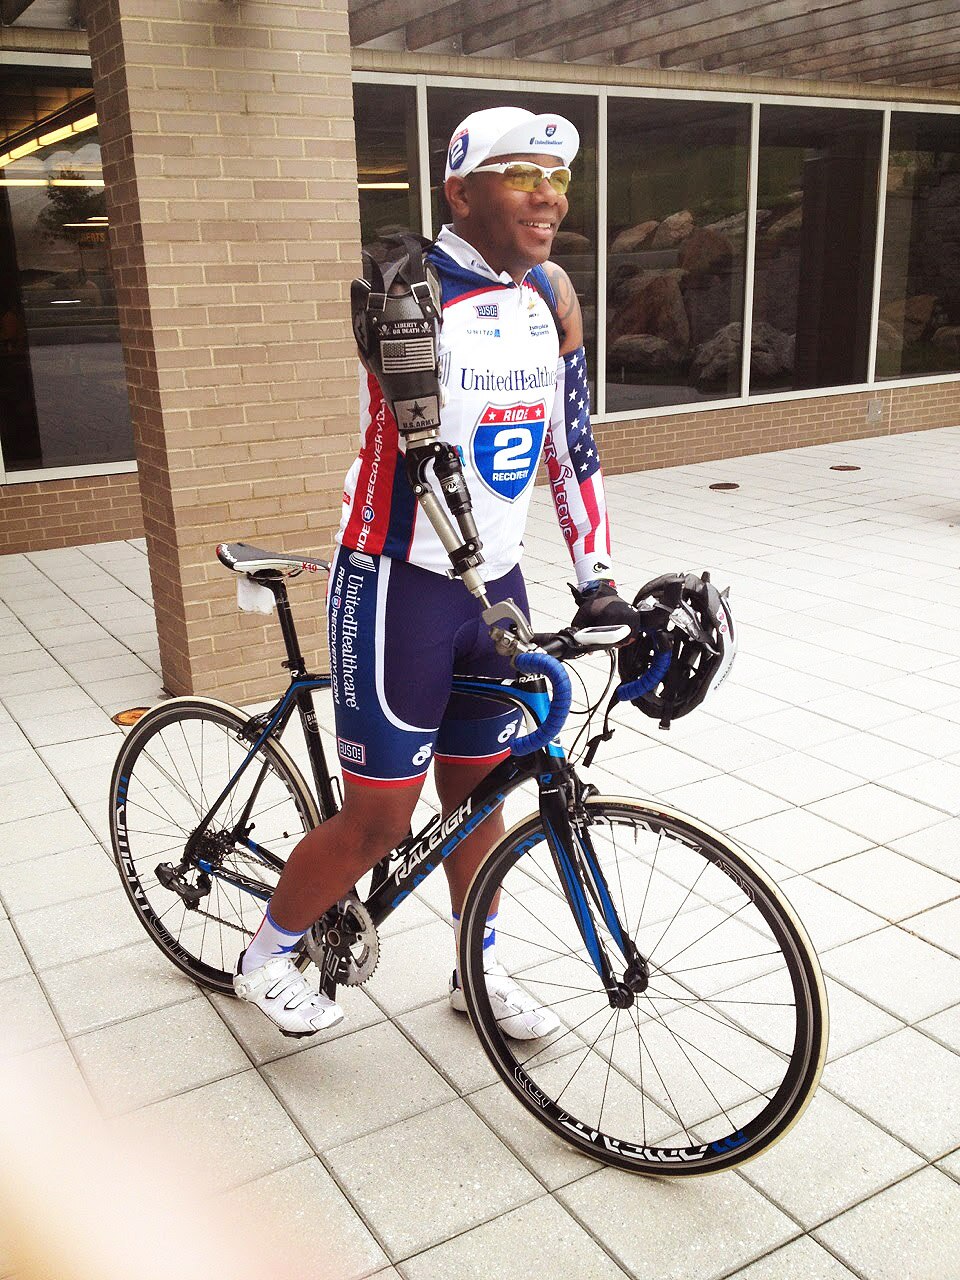 Army Staff Sgt. Michael Smith prepares to cycle in the Warrior Games Trials at West Point, N.Y., in June 2014. Smith qualified for cycling, but opted to compete in swimming and track and field at the Warrior Games in Colorado next month. Courtesy photo